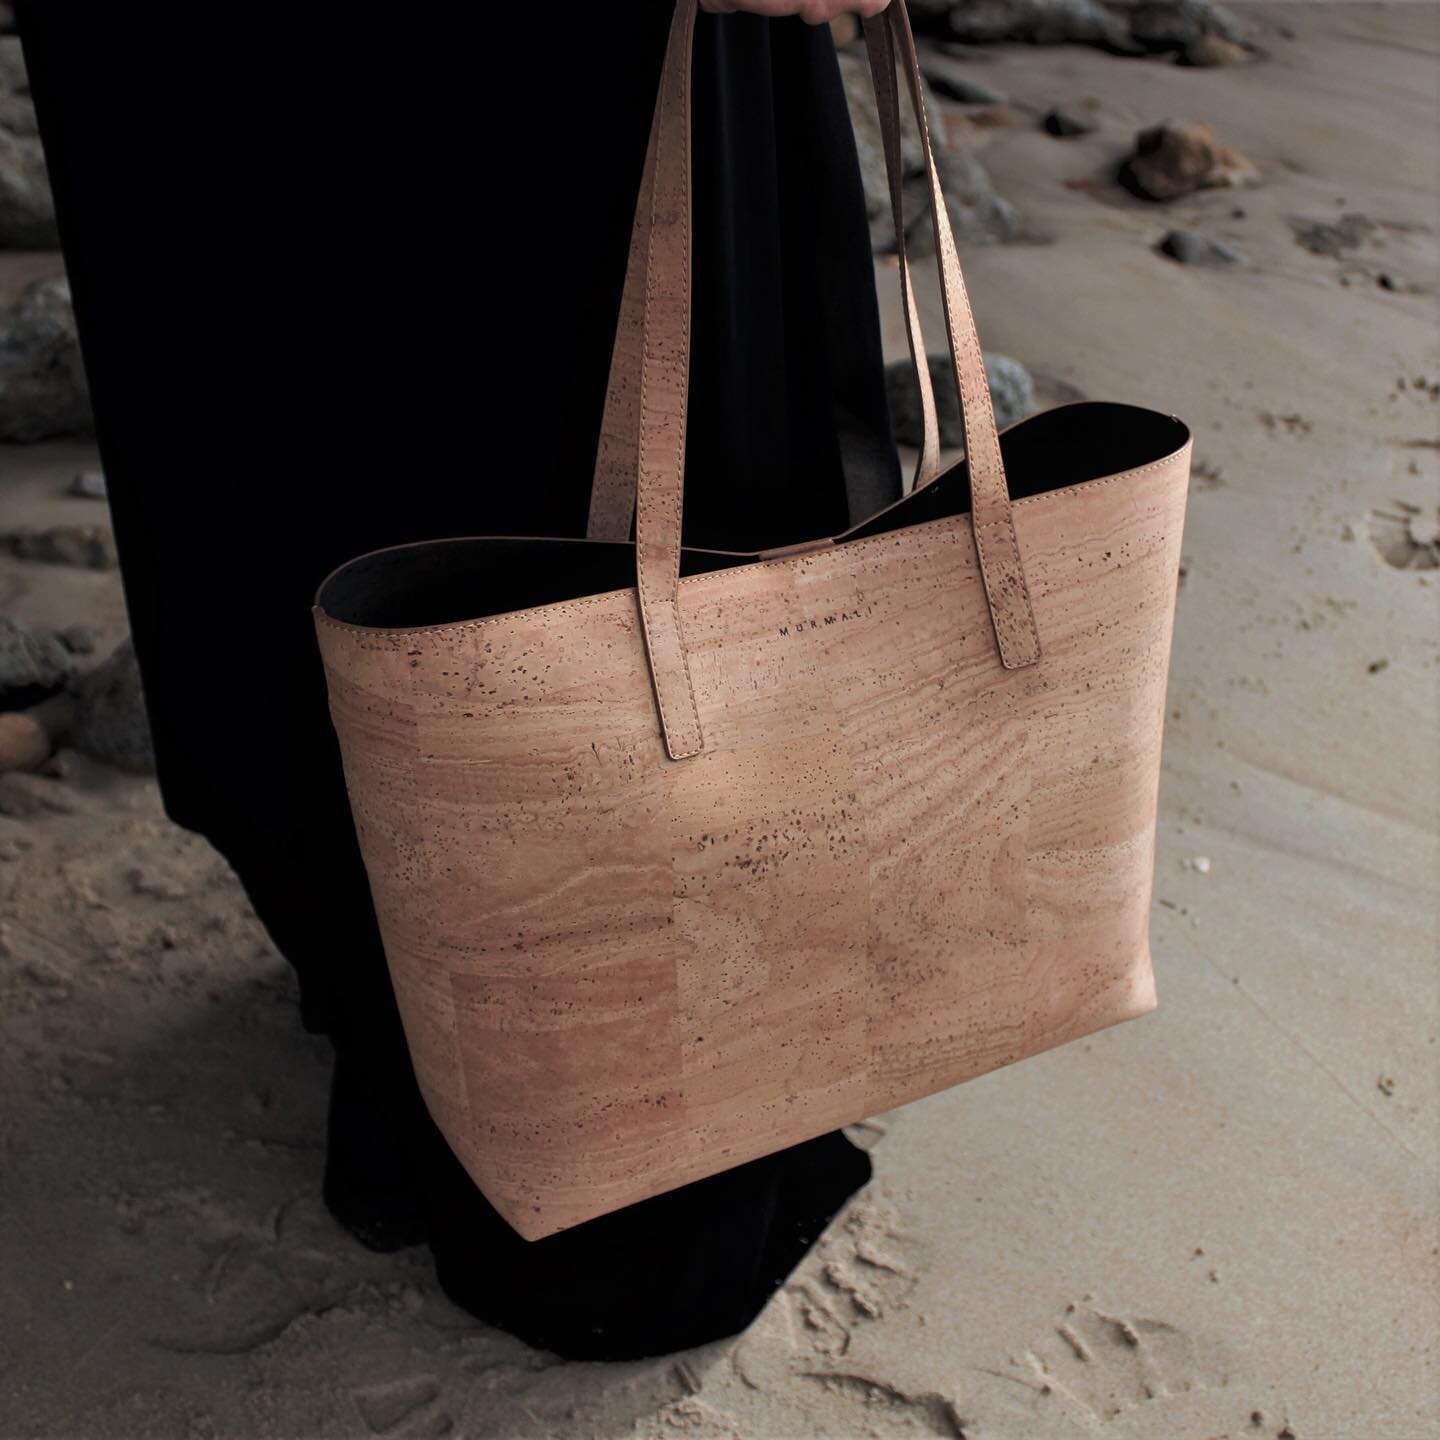 Fair treatment of people, animals, and the planet.  Buy better-quality products that will last longer. Murmali&acute;s ZETA TOTE BAG in NATURAL. Inspired by Nature. Also available in beautiful BLACK color. PETA-Approved Vegan.

#earthfriendlyfashion 